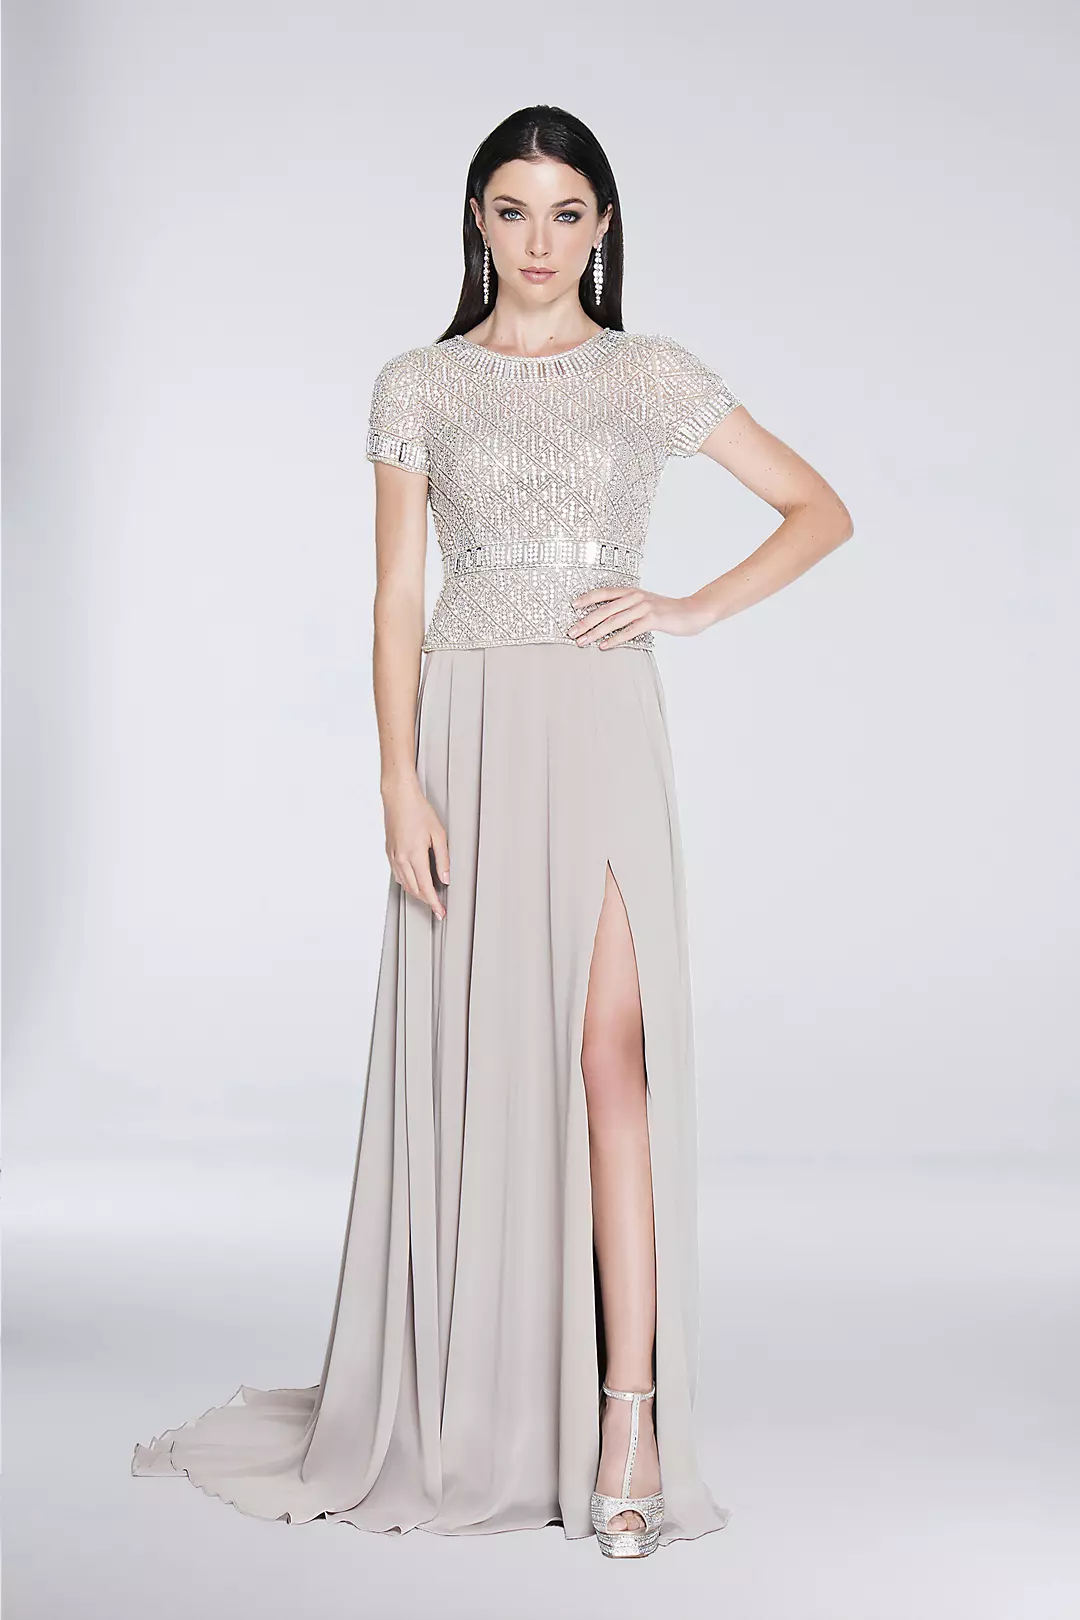 Jewel-Encrusted Short Sleeve Chiffon A-Line Gown Image